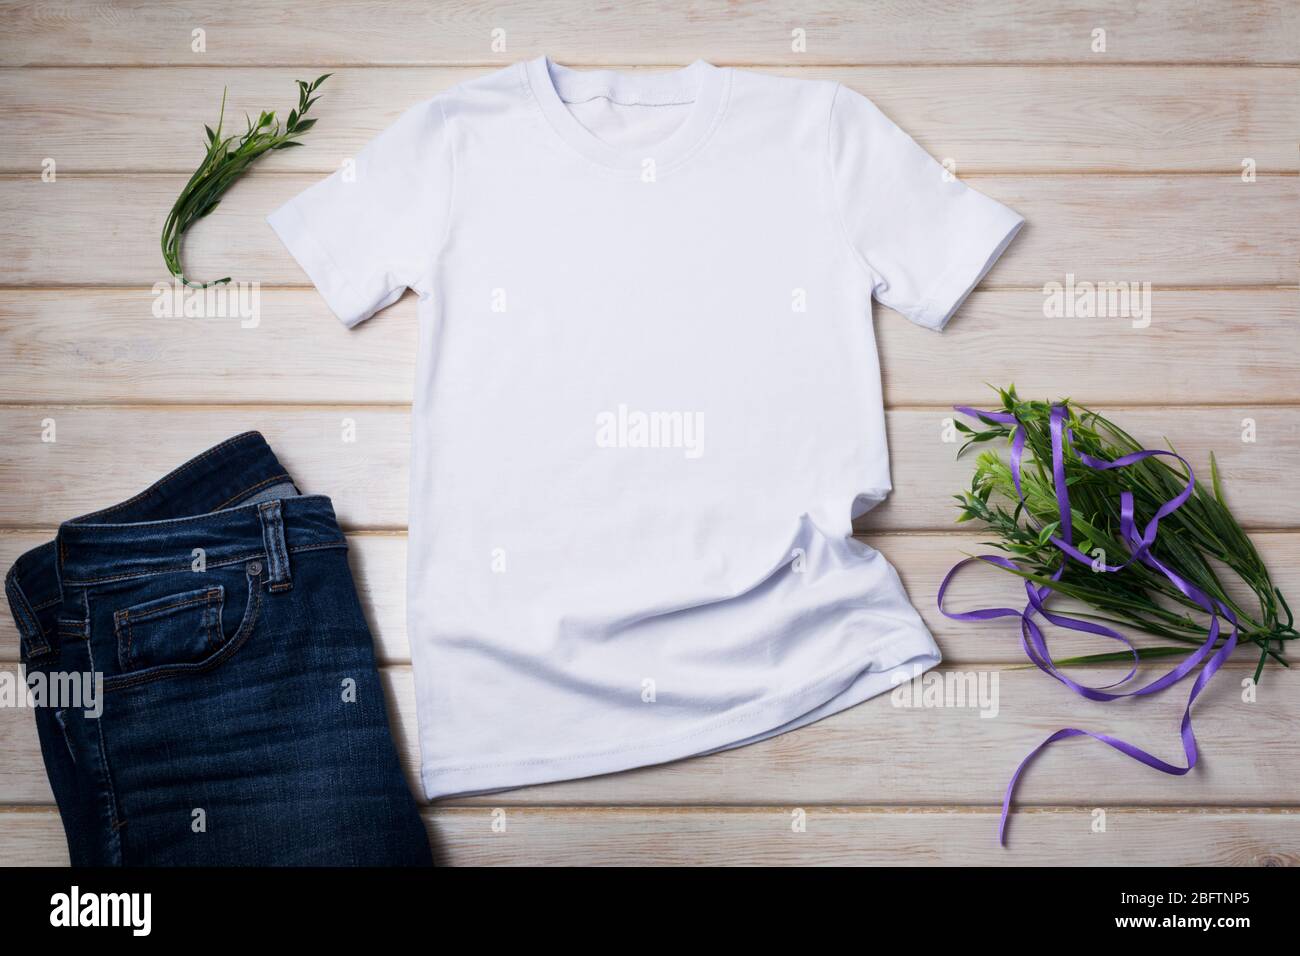 White unisex cotton T-shirt mockup with jeans, grass and purple ribbon. Design t shirt template, tee print presentation mock up Stock Photo